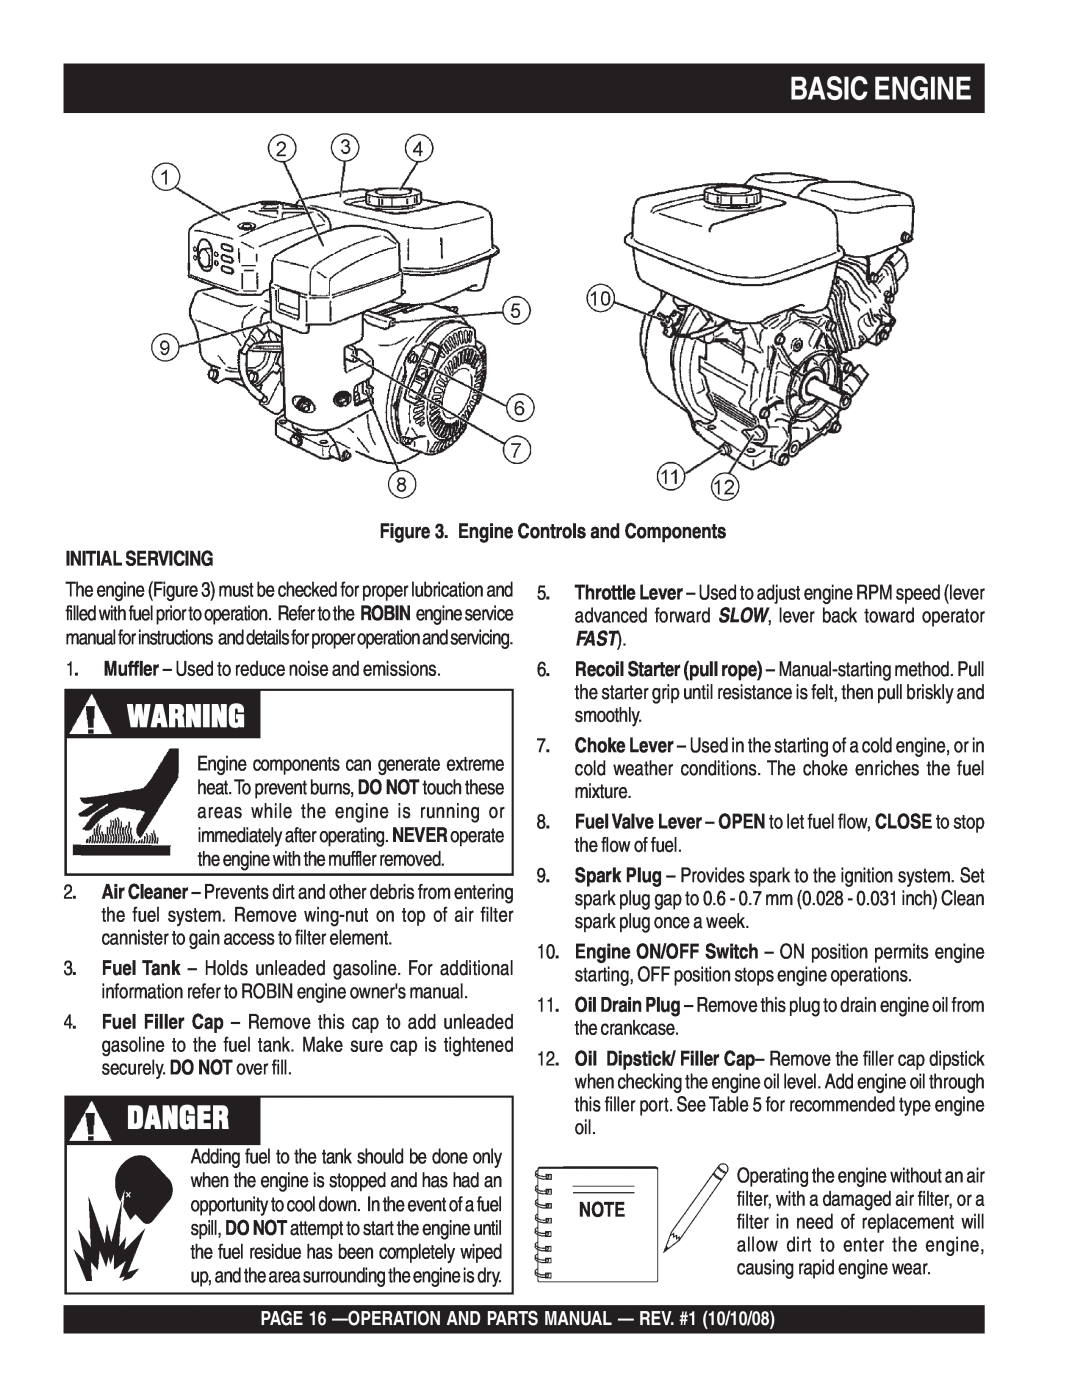 Multiquip QP4TE manual Basic Engine, Danger, Engine Controls and Components INITIAL SERVICING, Fast 